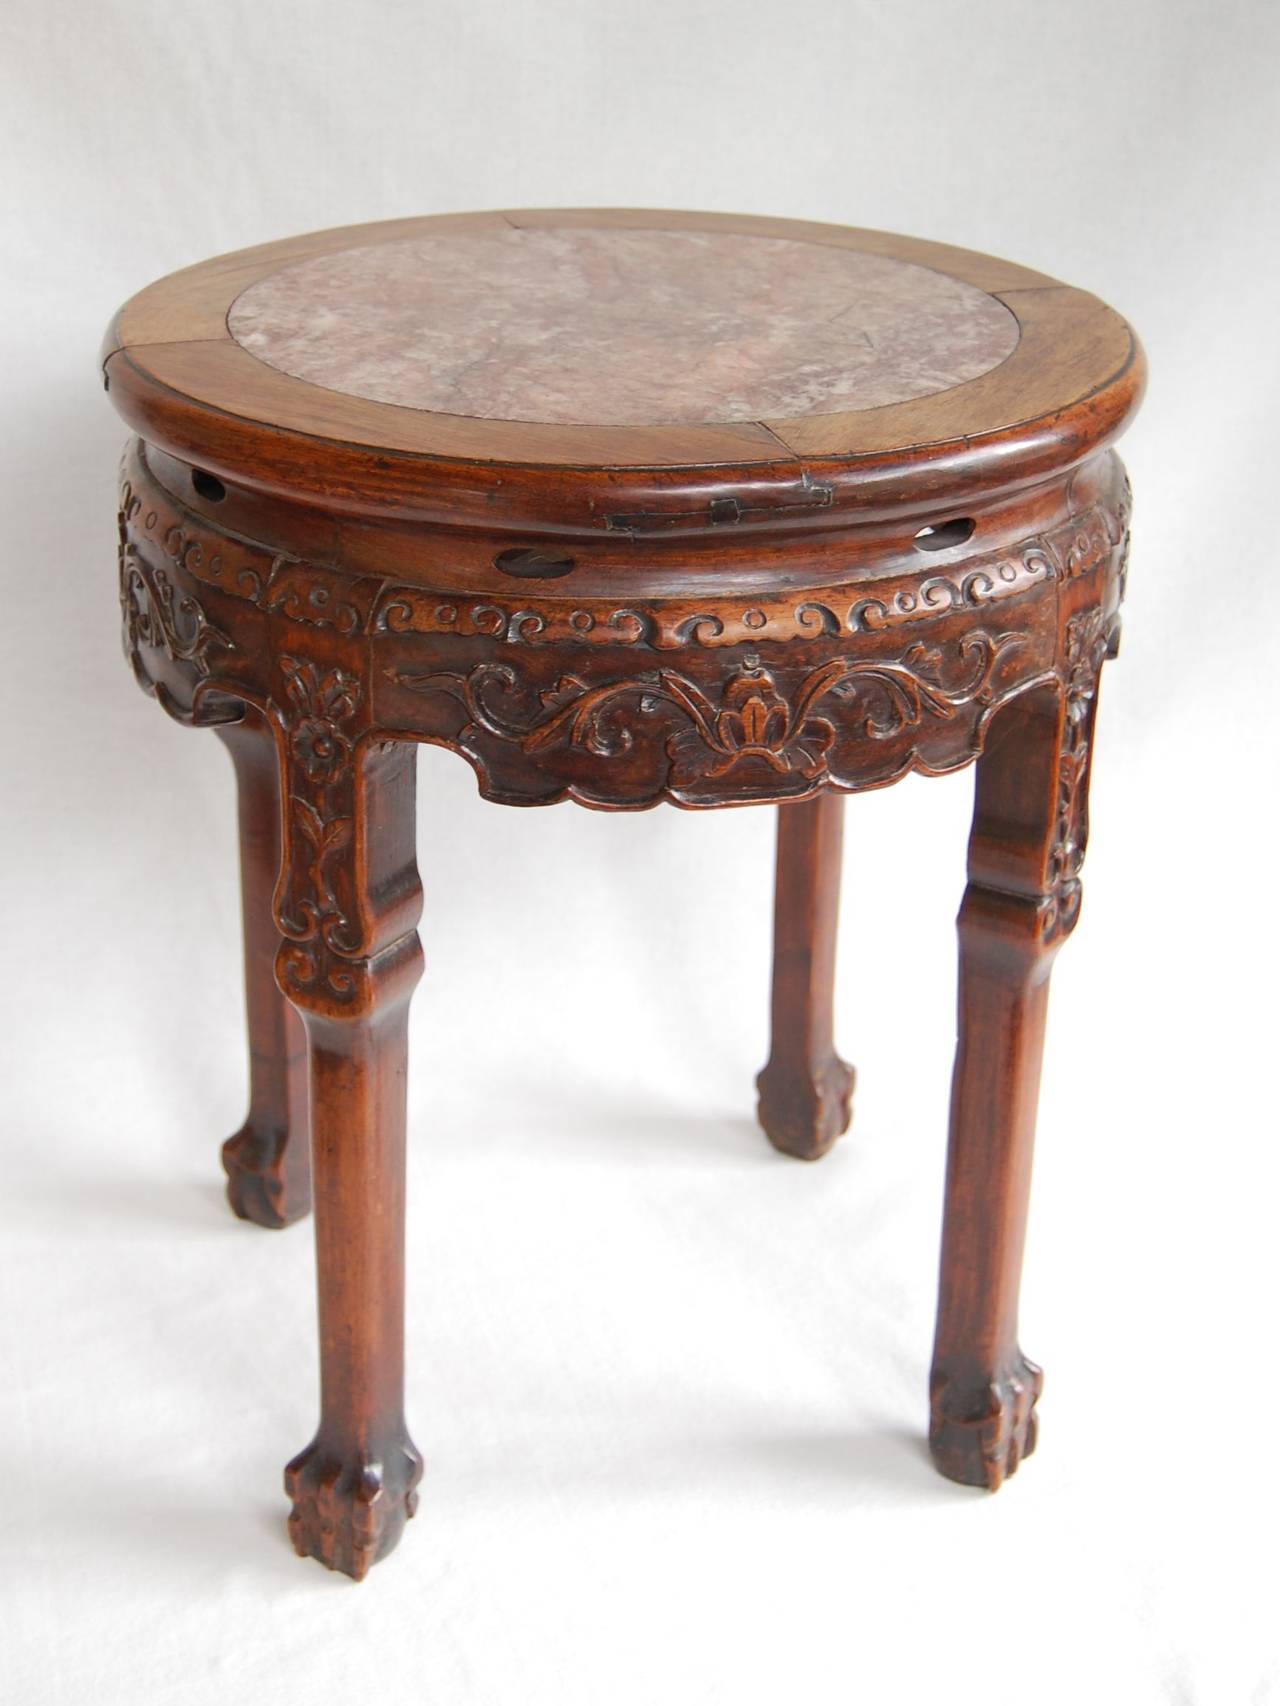 Late 19th-century circular Chinese table with marble top. Excellent condition with beautiful color and patina.